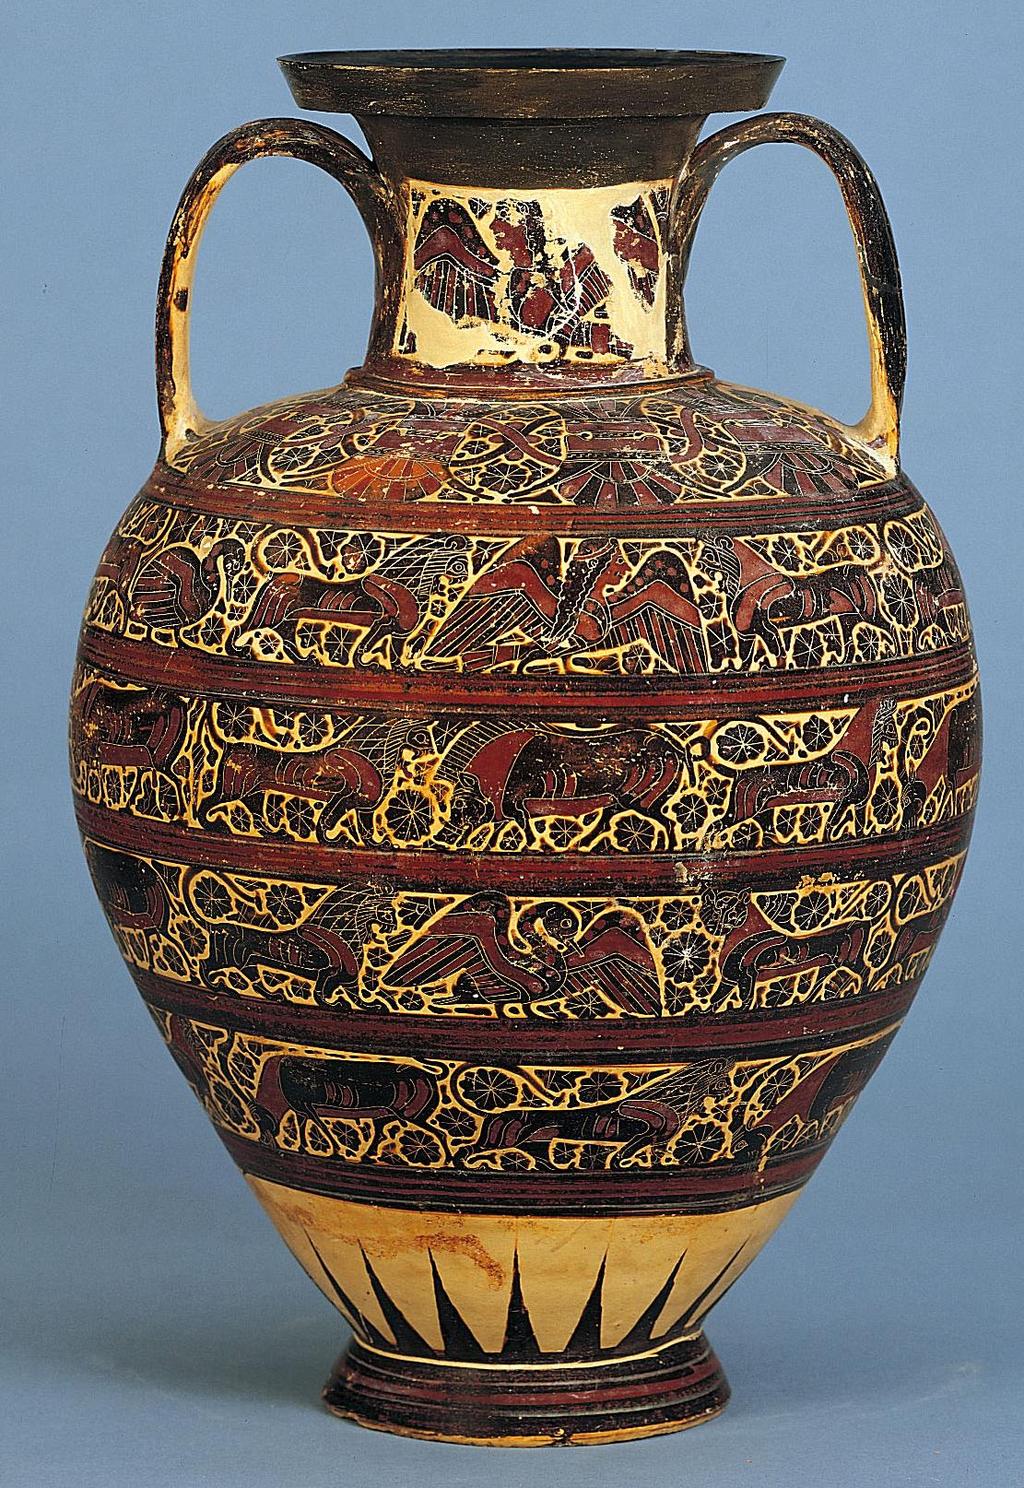 Orientalizing Art Amphora The composite creatures represented on the amphora show strong influence form the East, or the Orient.